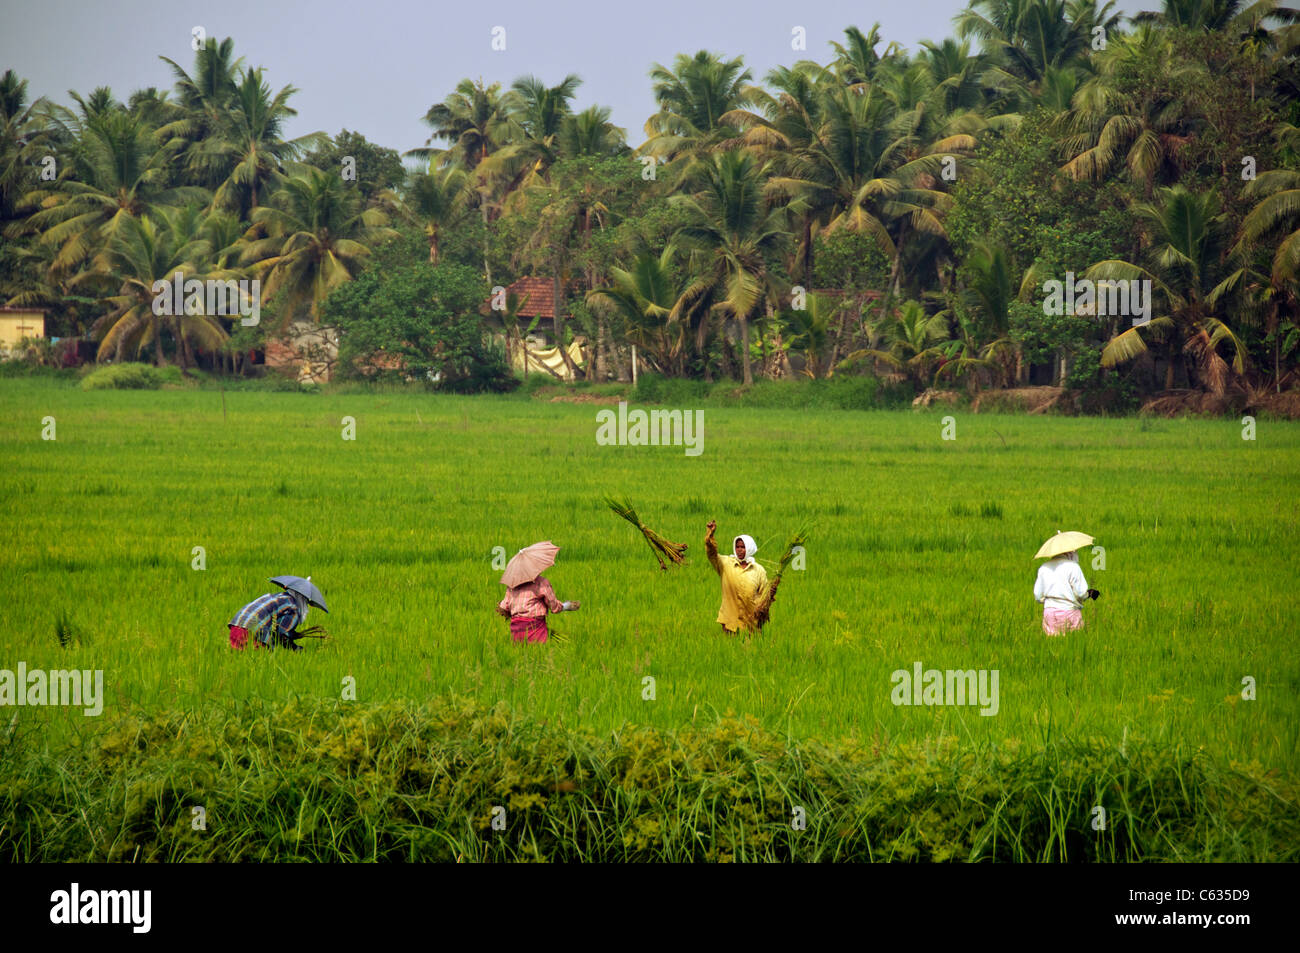 Four women in rice field Backwaters Kerala South India Stock Photo